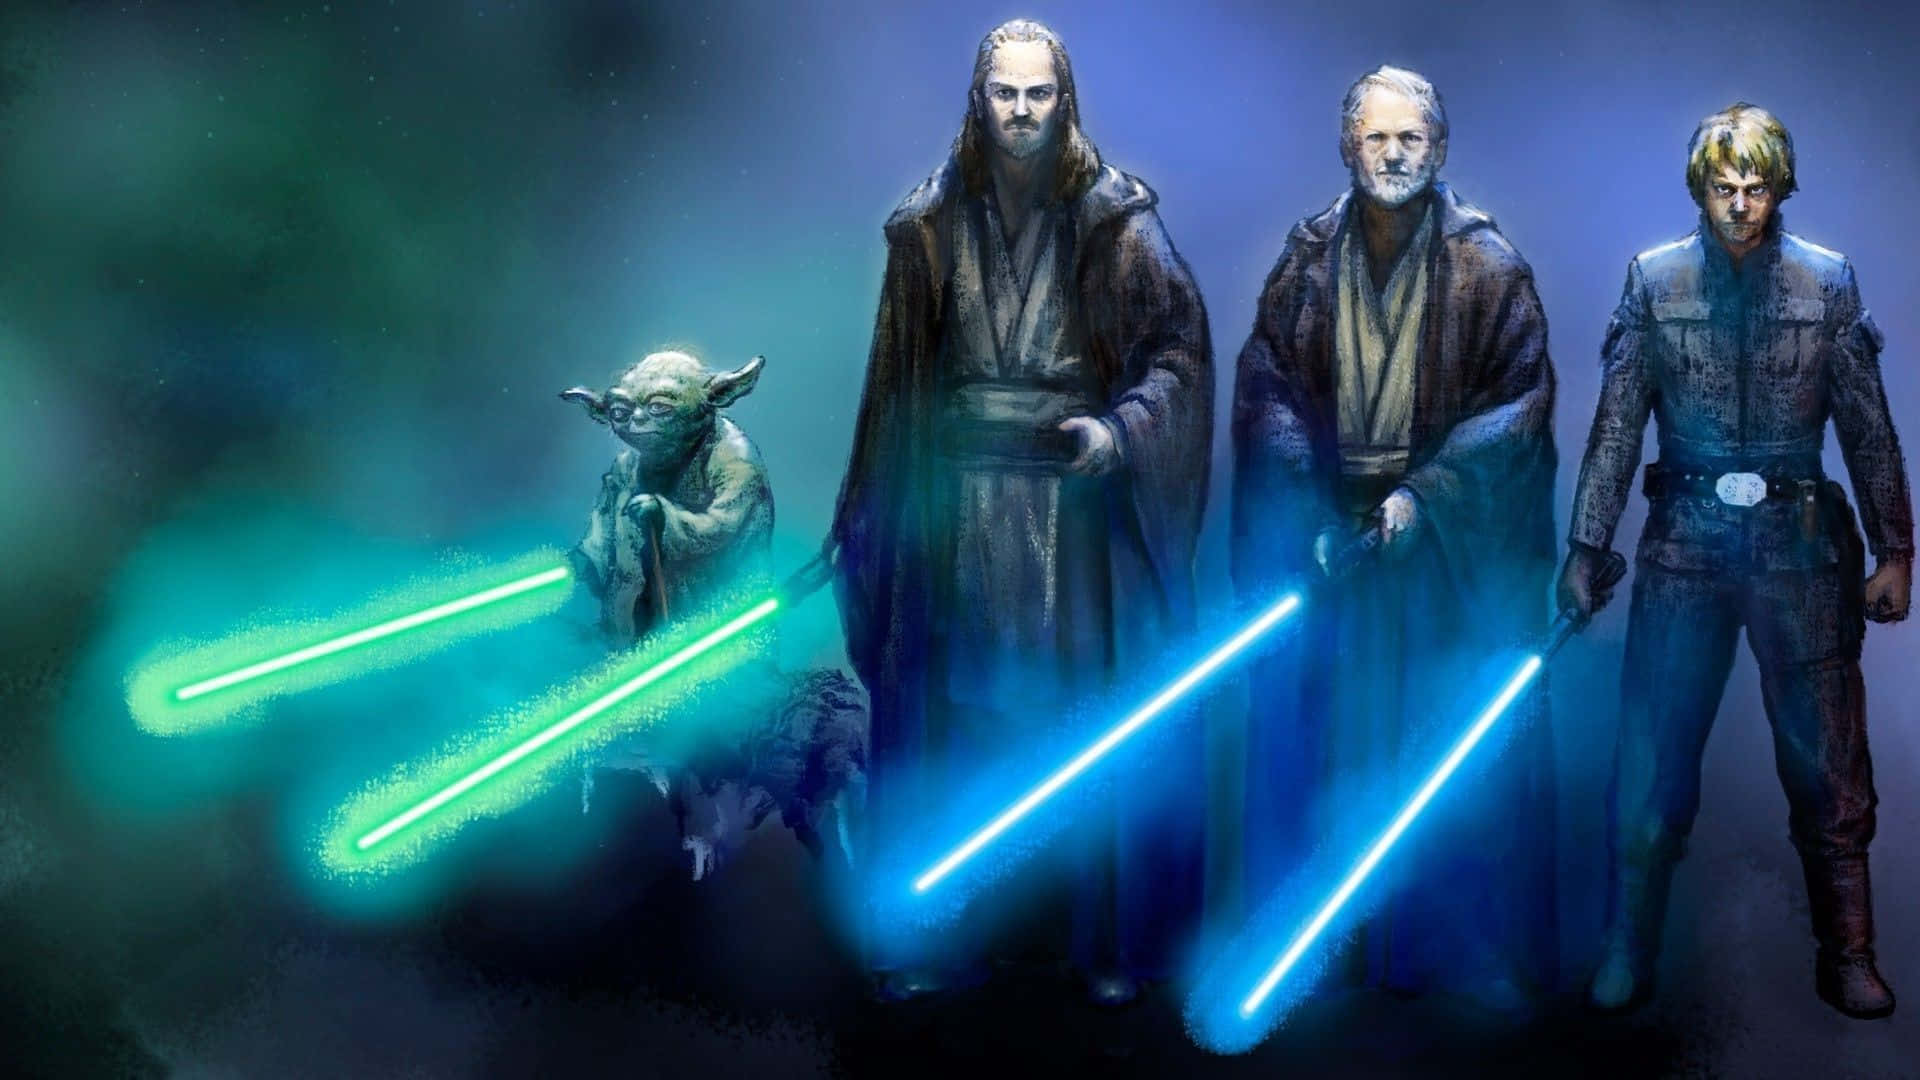 “Join the Dark Side of the Force” Wallpaper